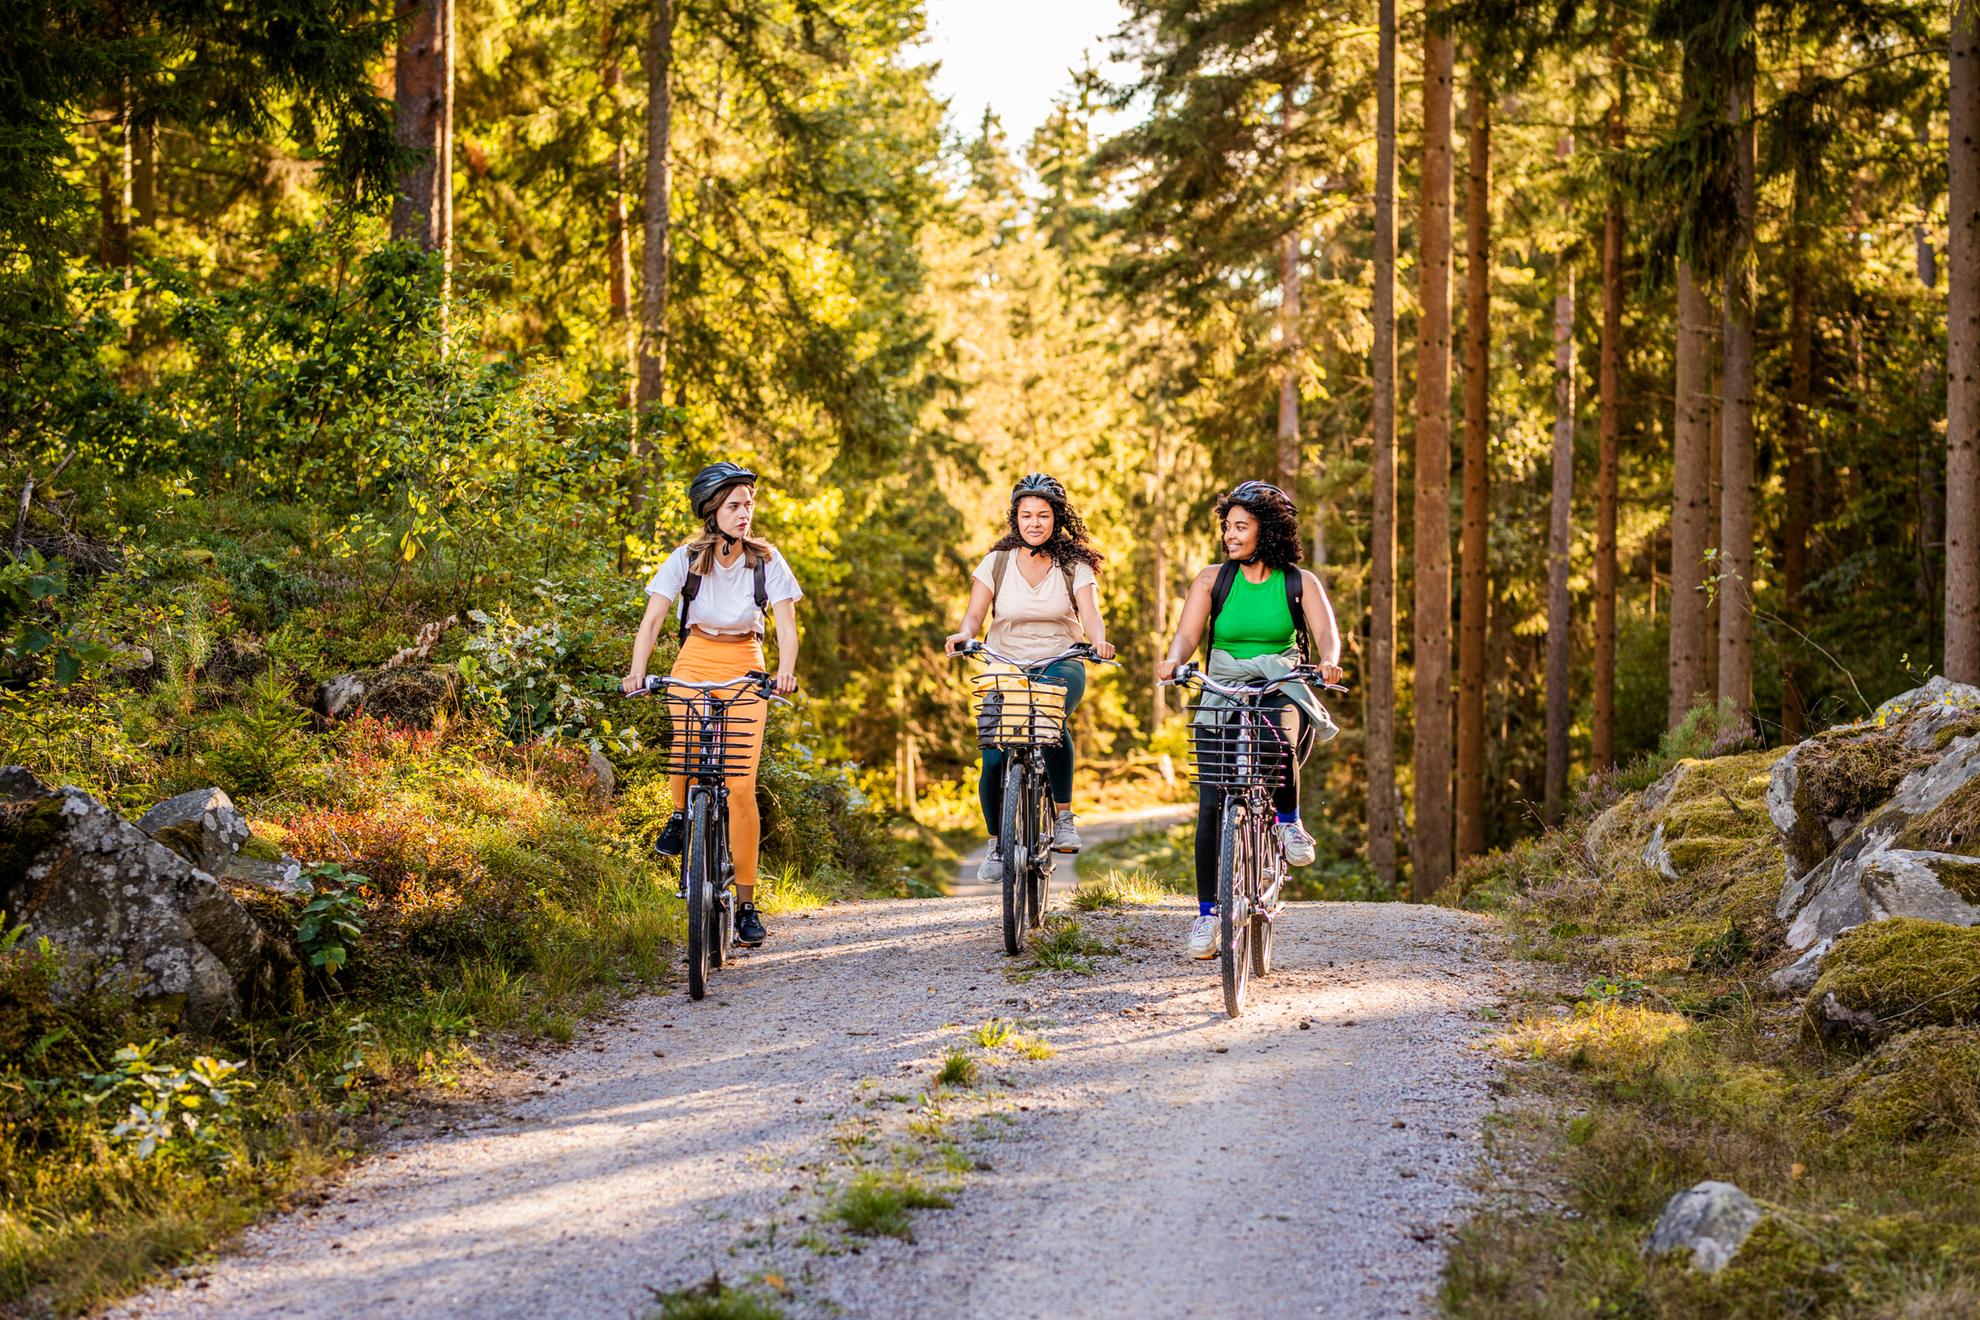 Three young women wearing helmets biking through the forest on a gravel road.